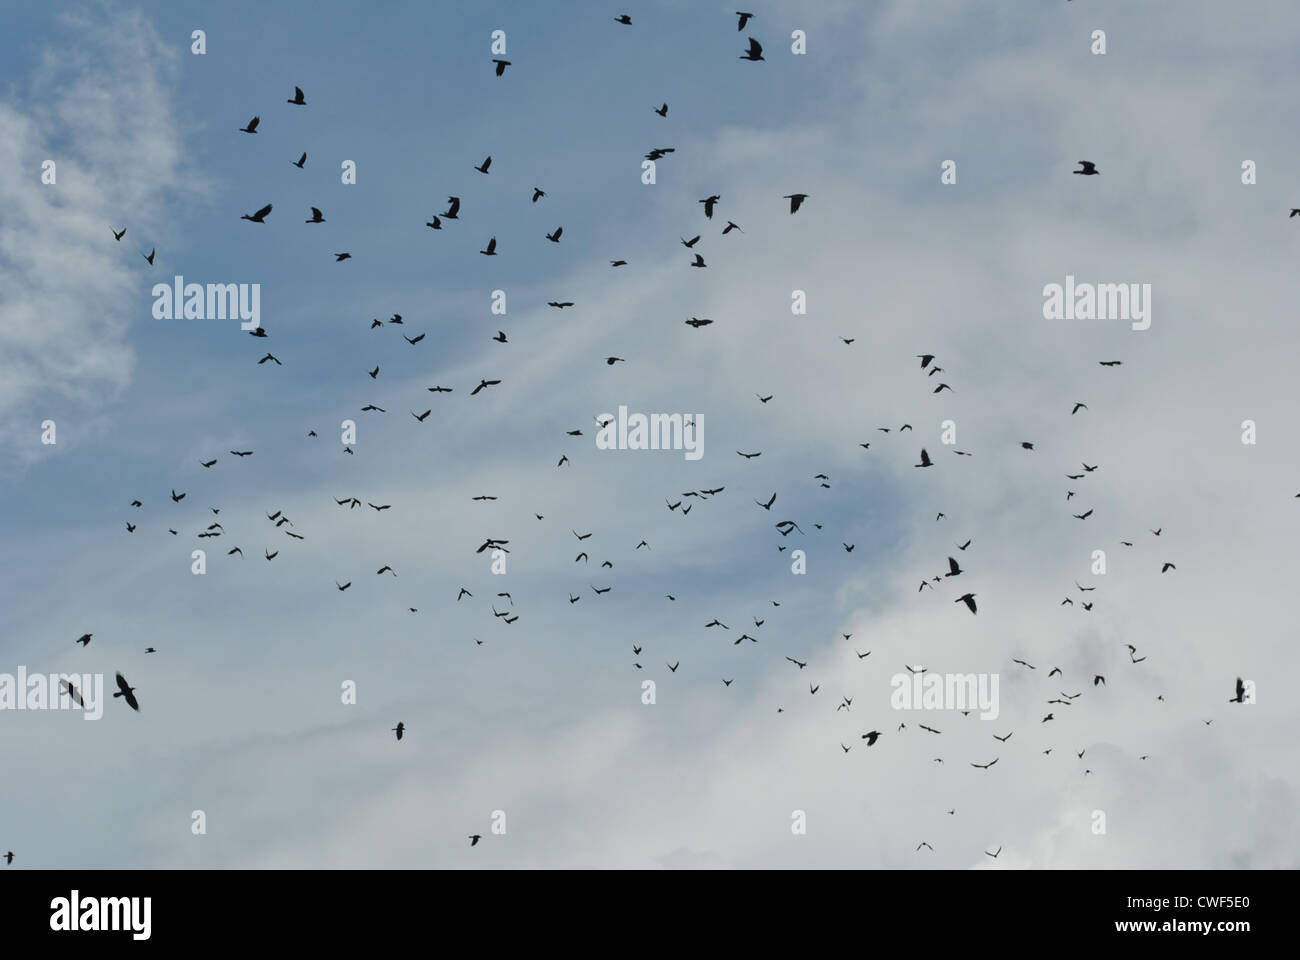 flock of birds flying in a blue cloudy sky Stock Photo